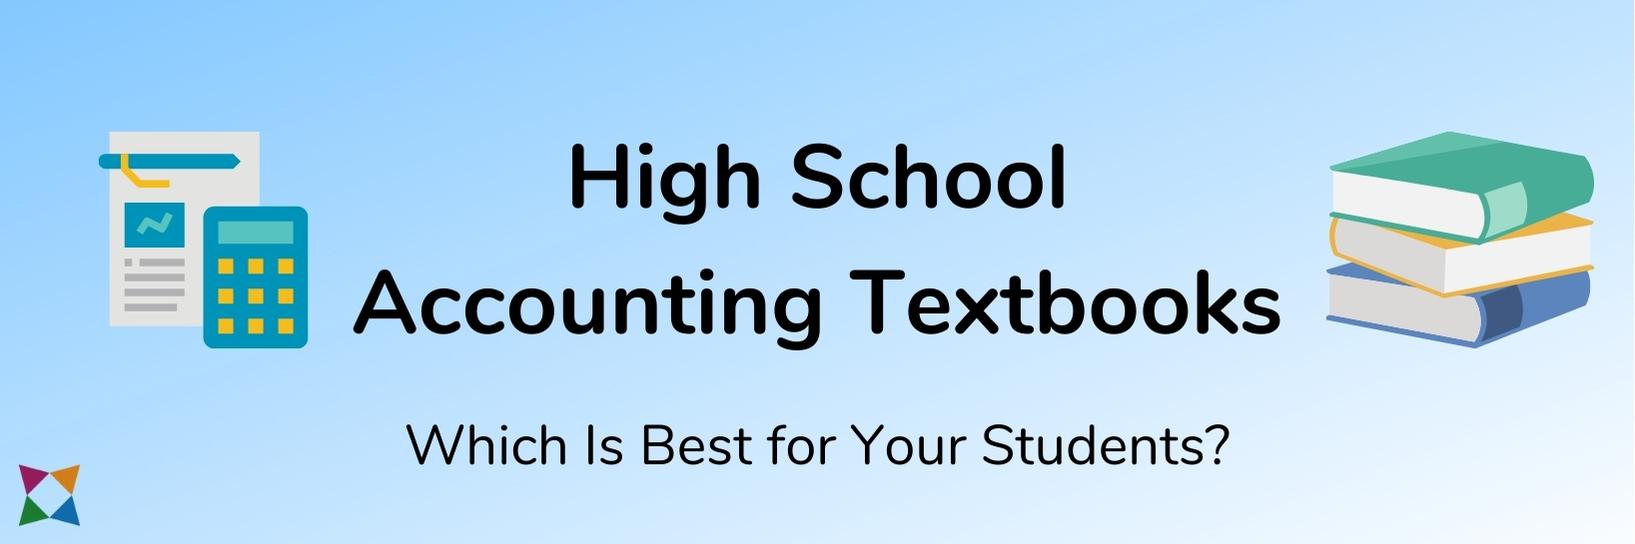 Accounting Textbooks for High School: 4 Best Options for 2023